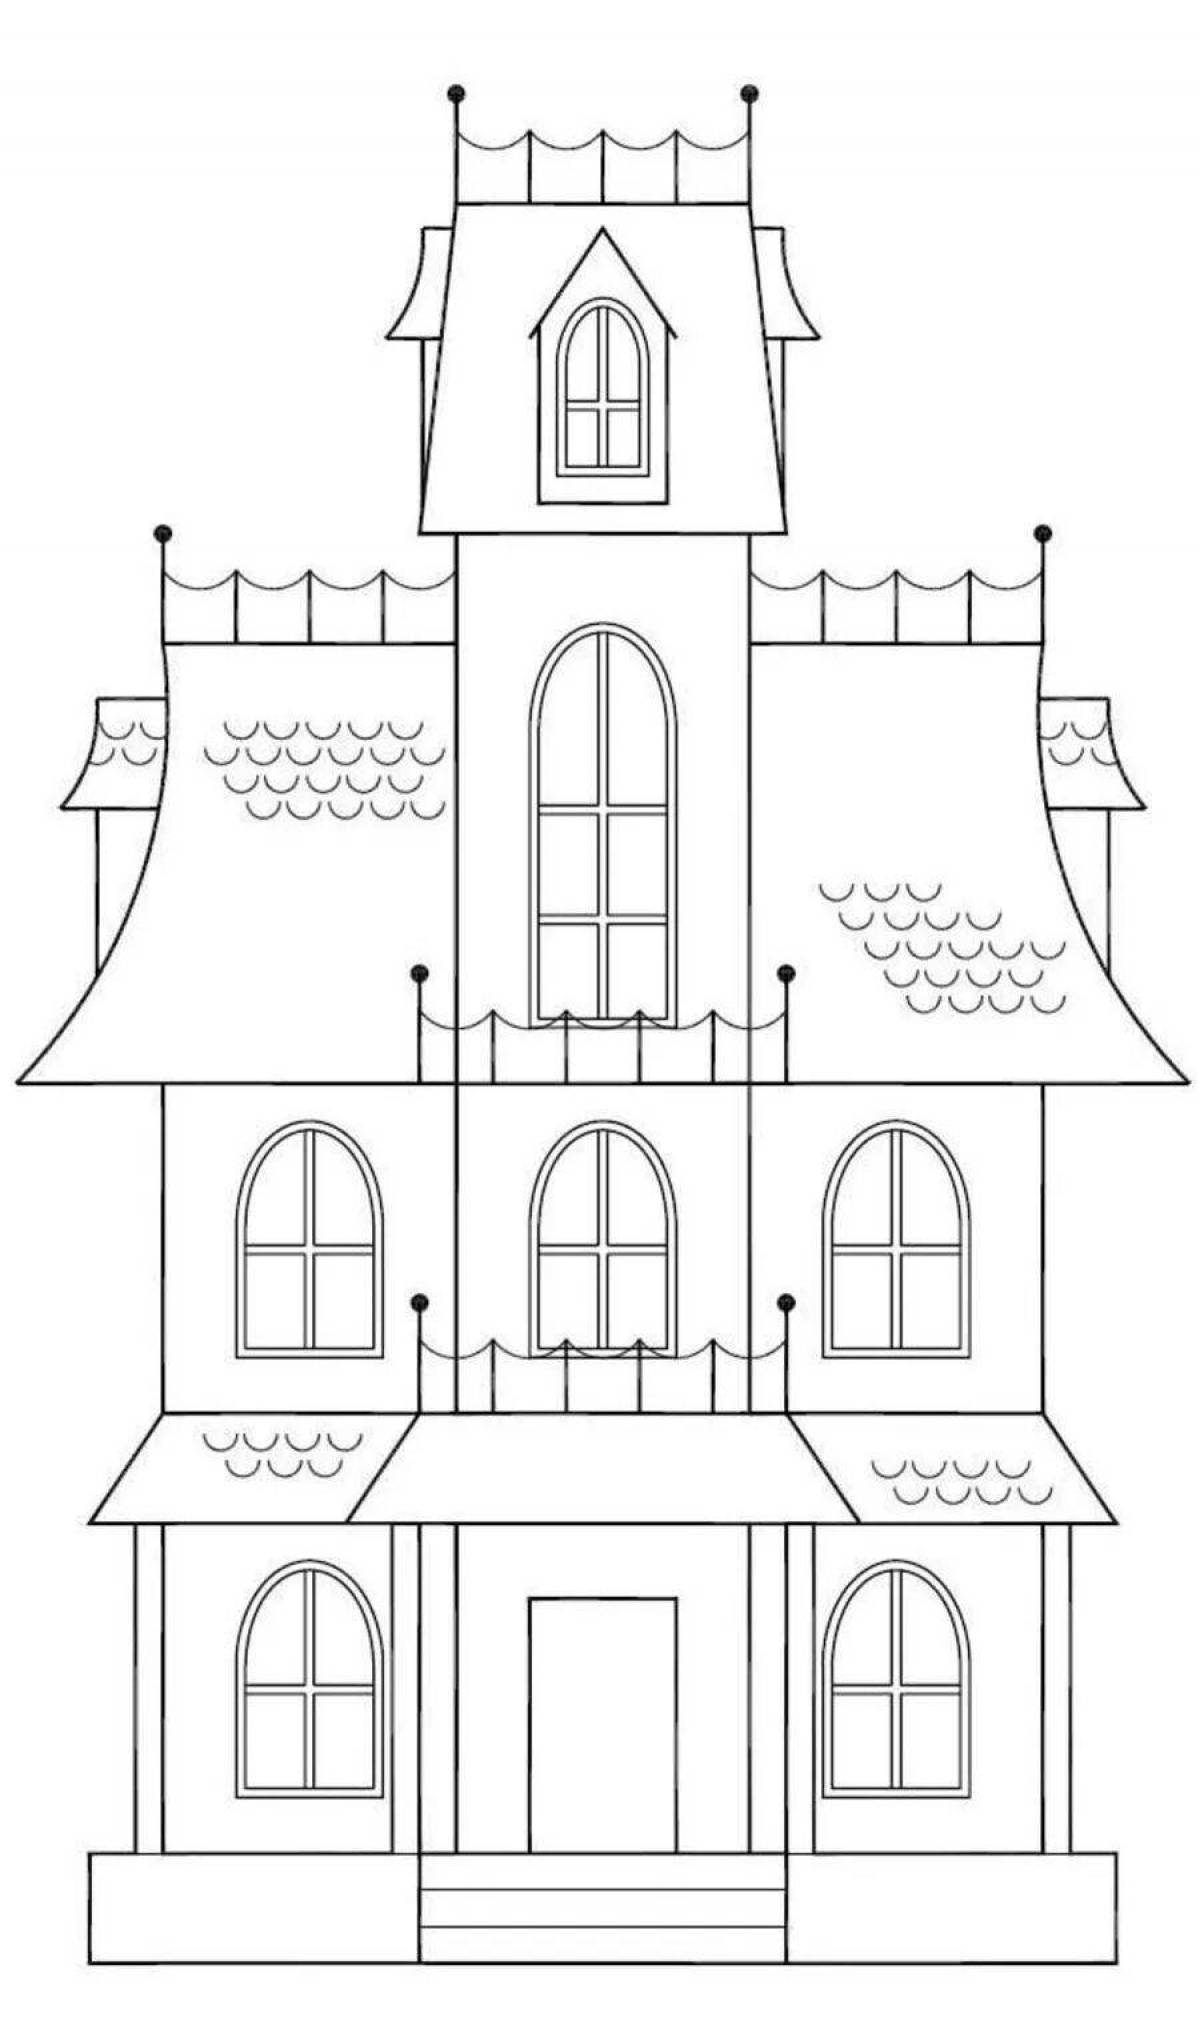 Cute paper house coloring page